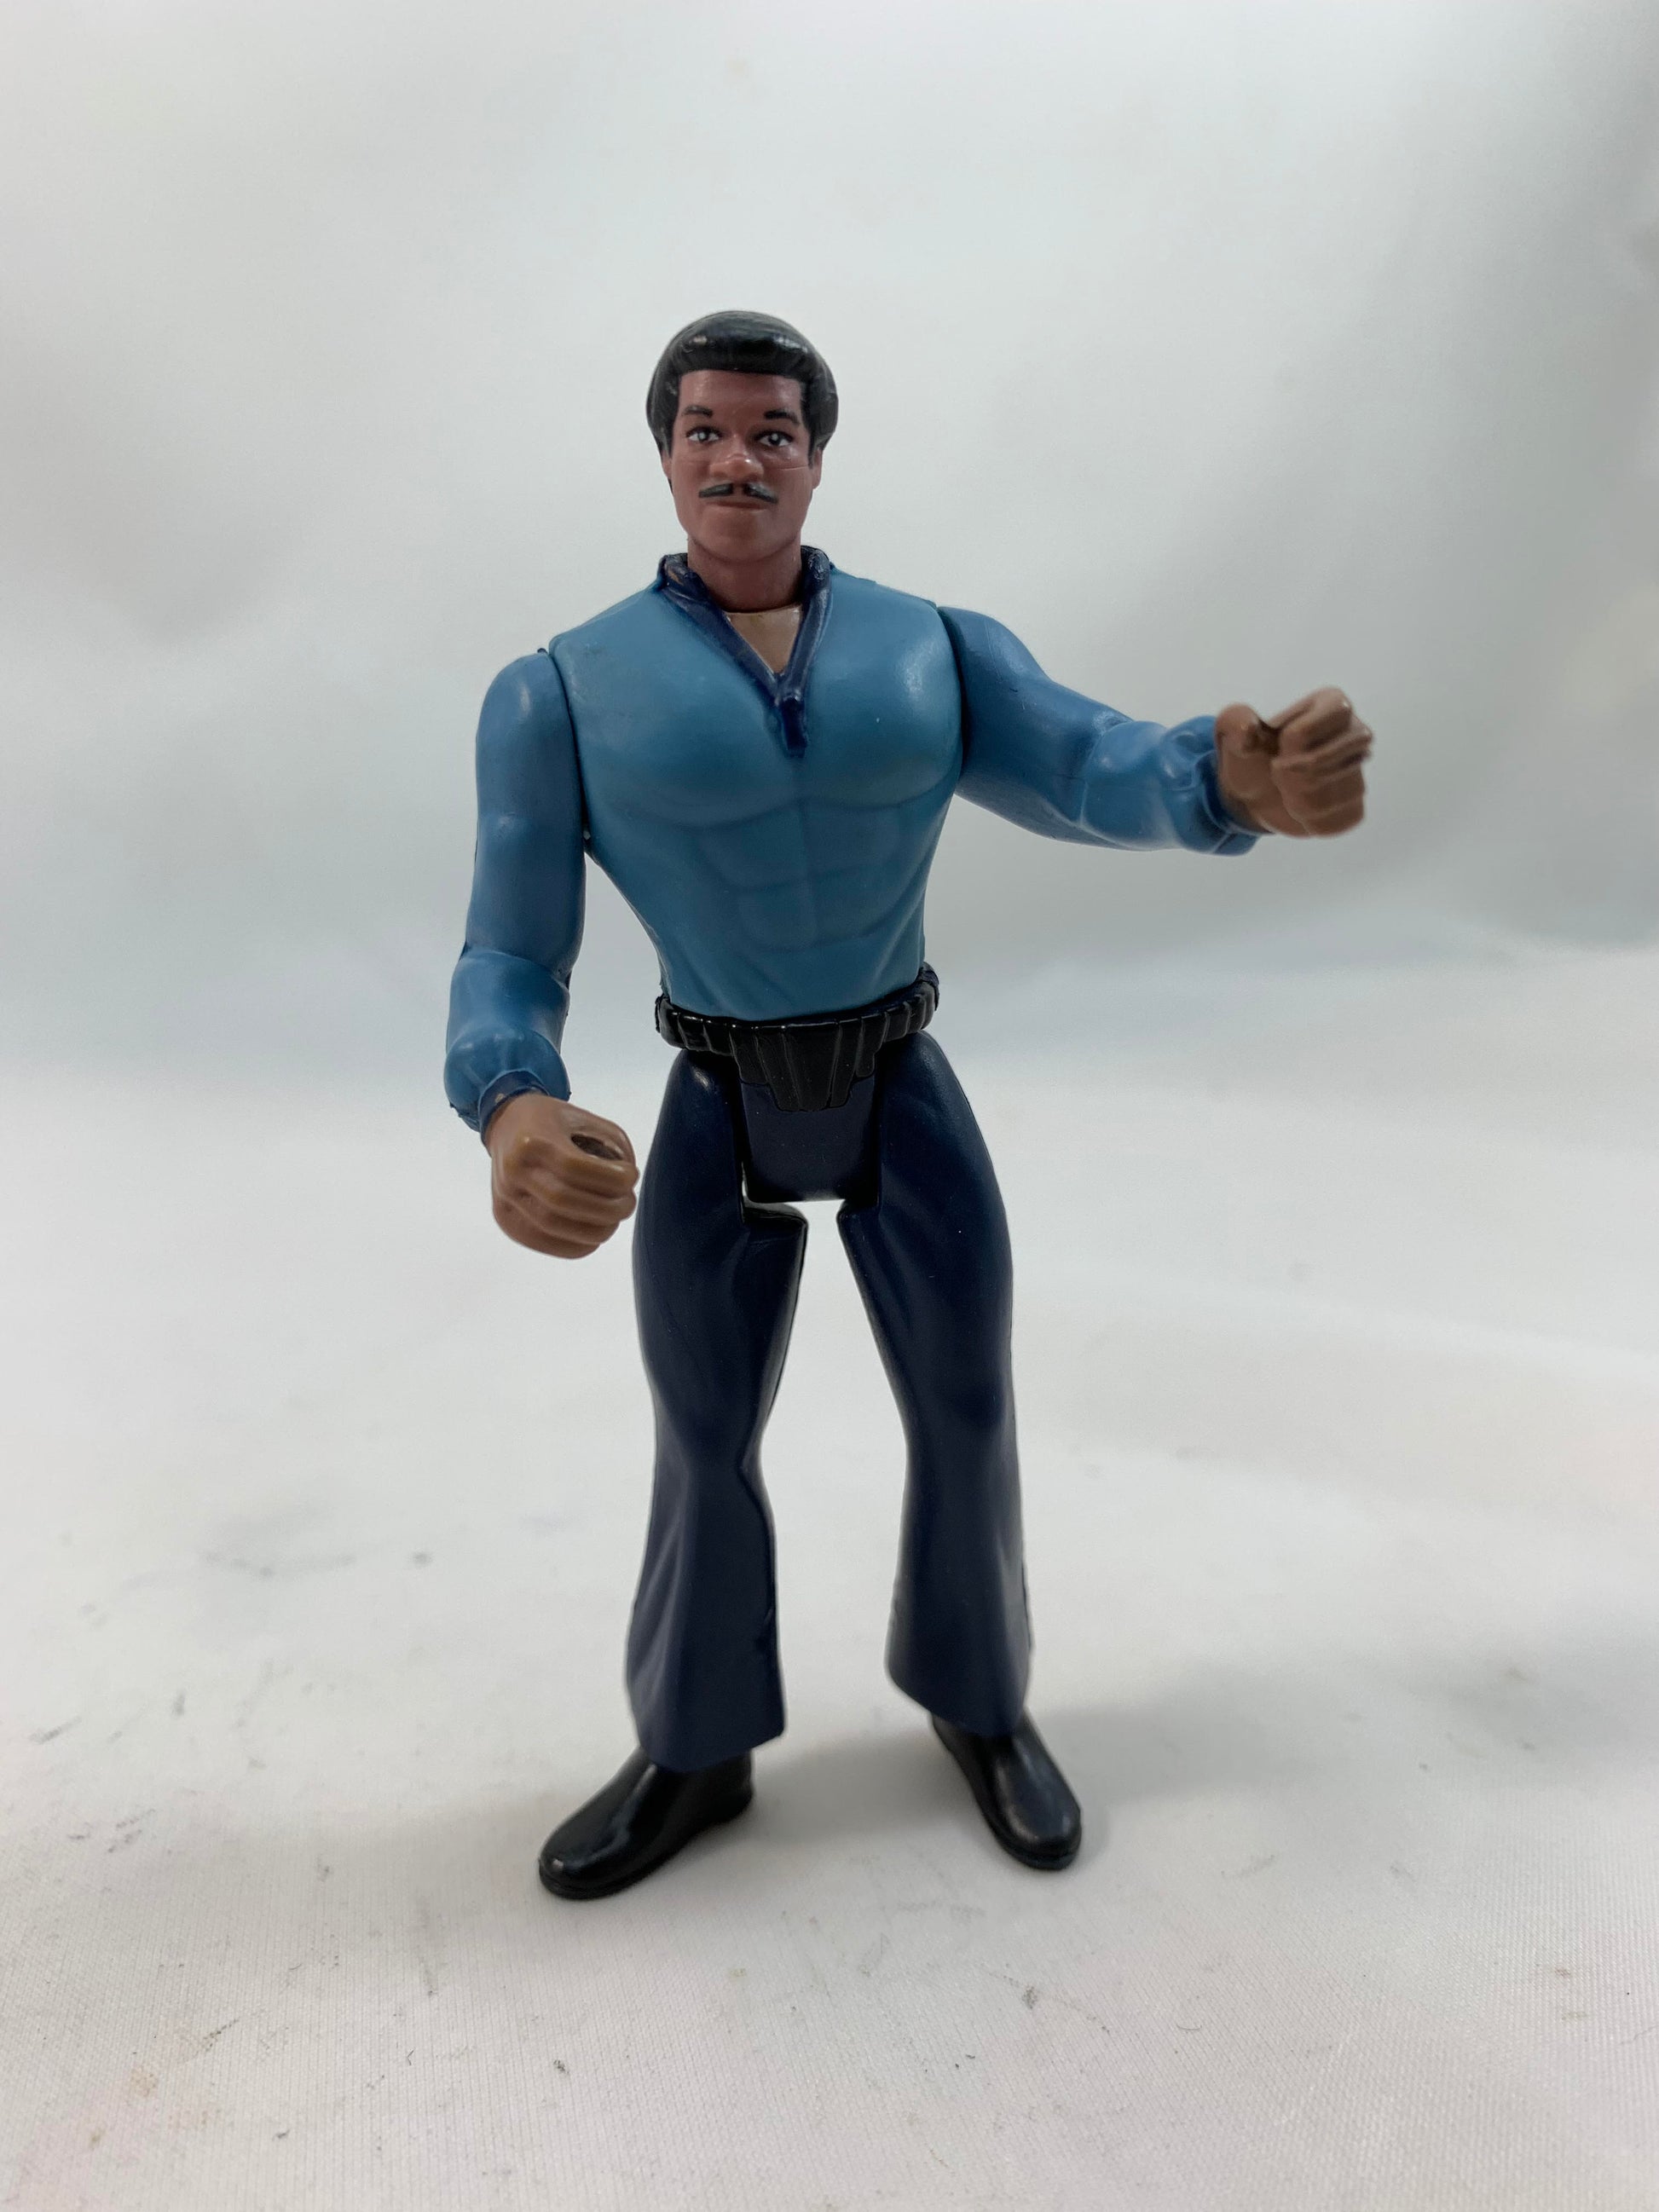 Kenner Star Wars: Power of the Force POTF 2 Lando Calrissian COO LFL 1995 Made in China - Loose